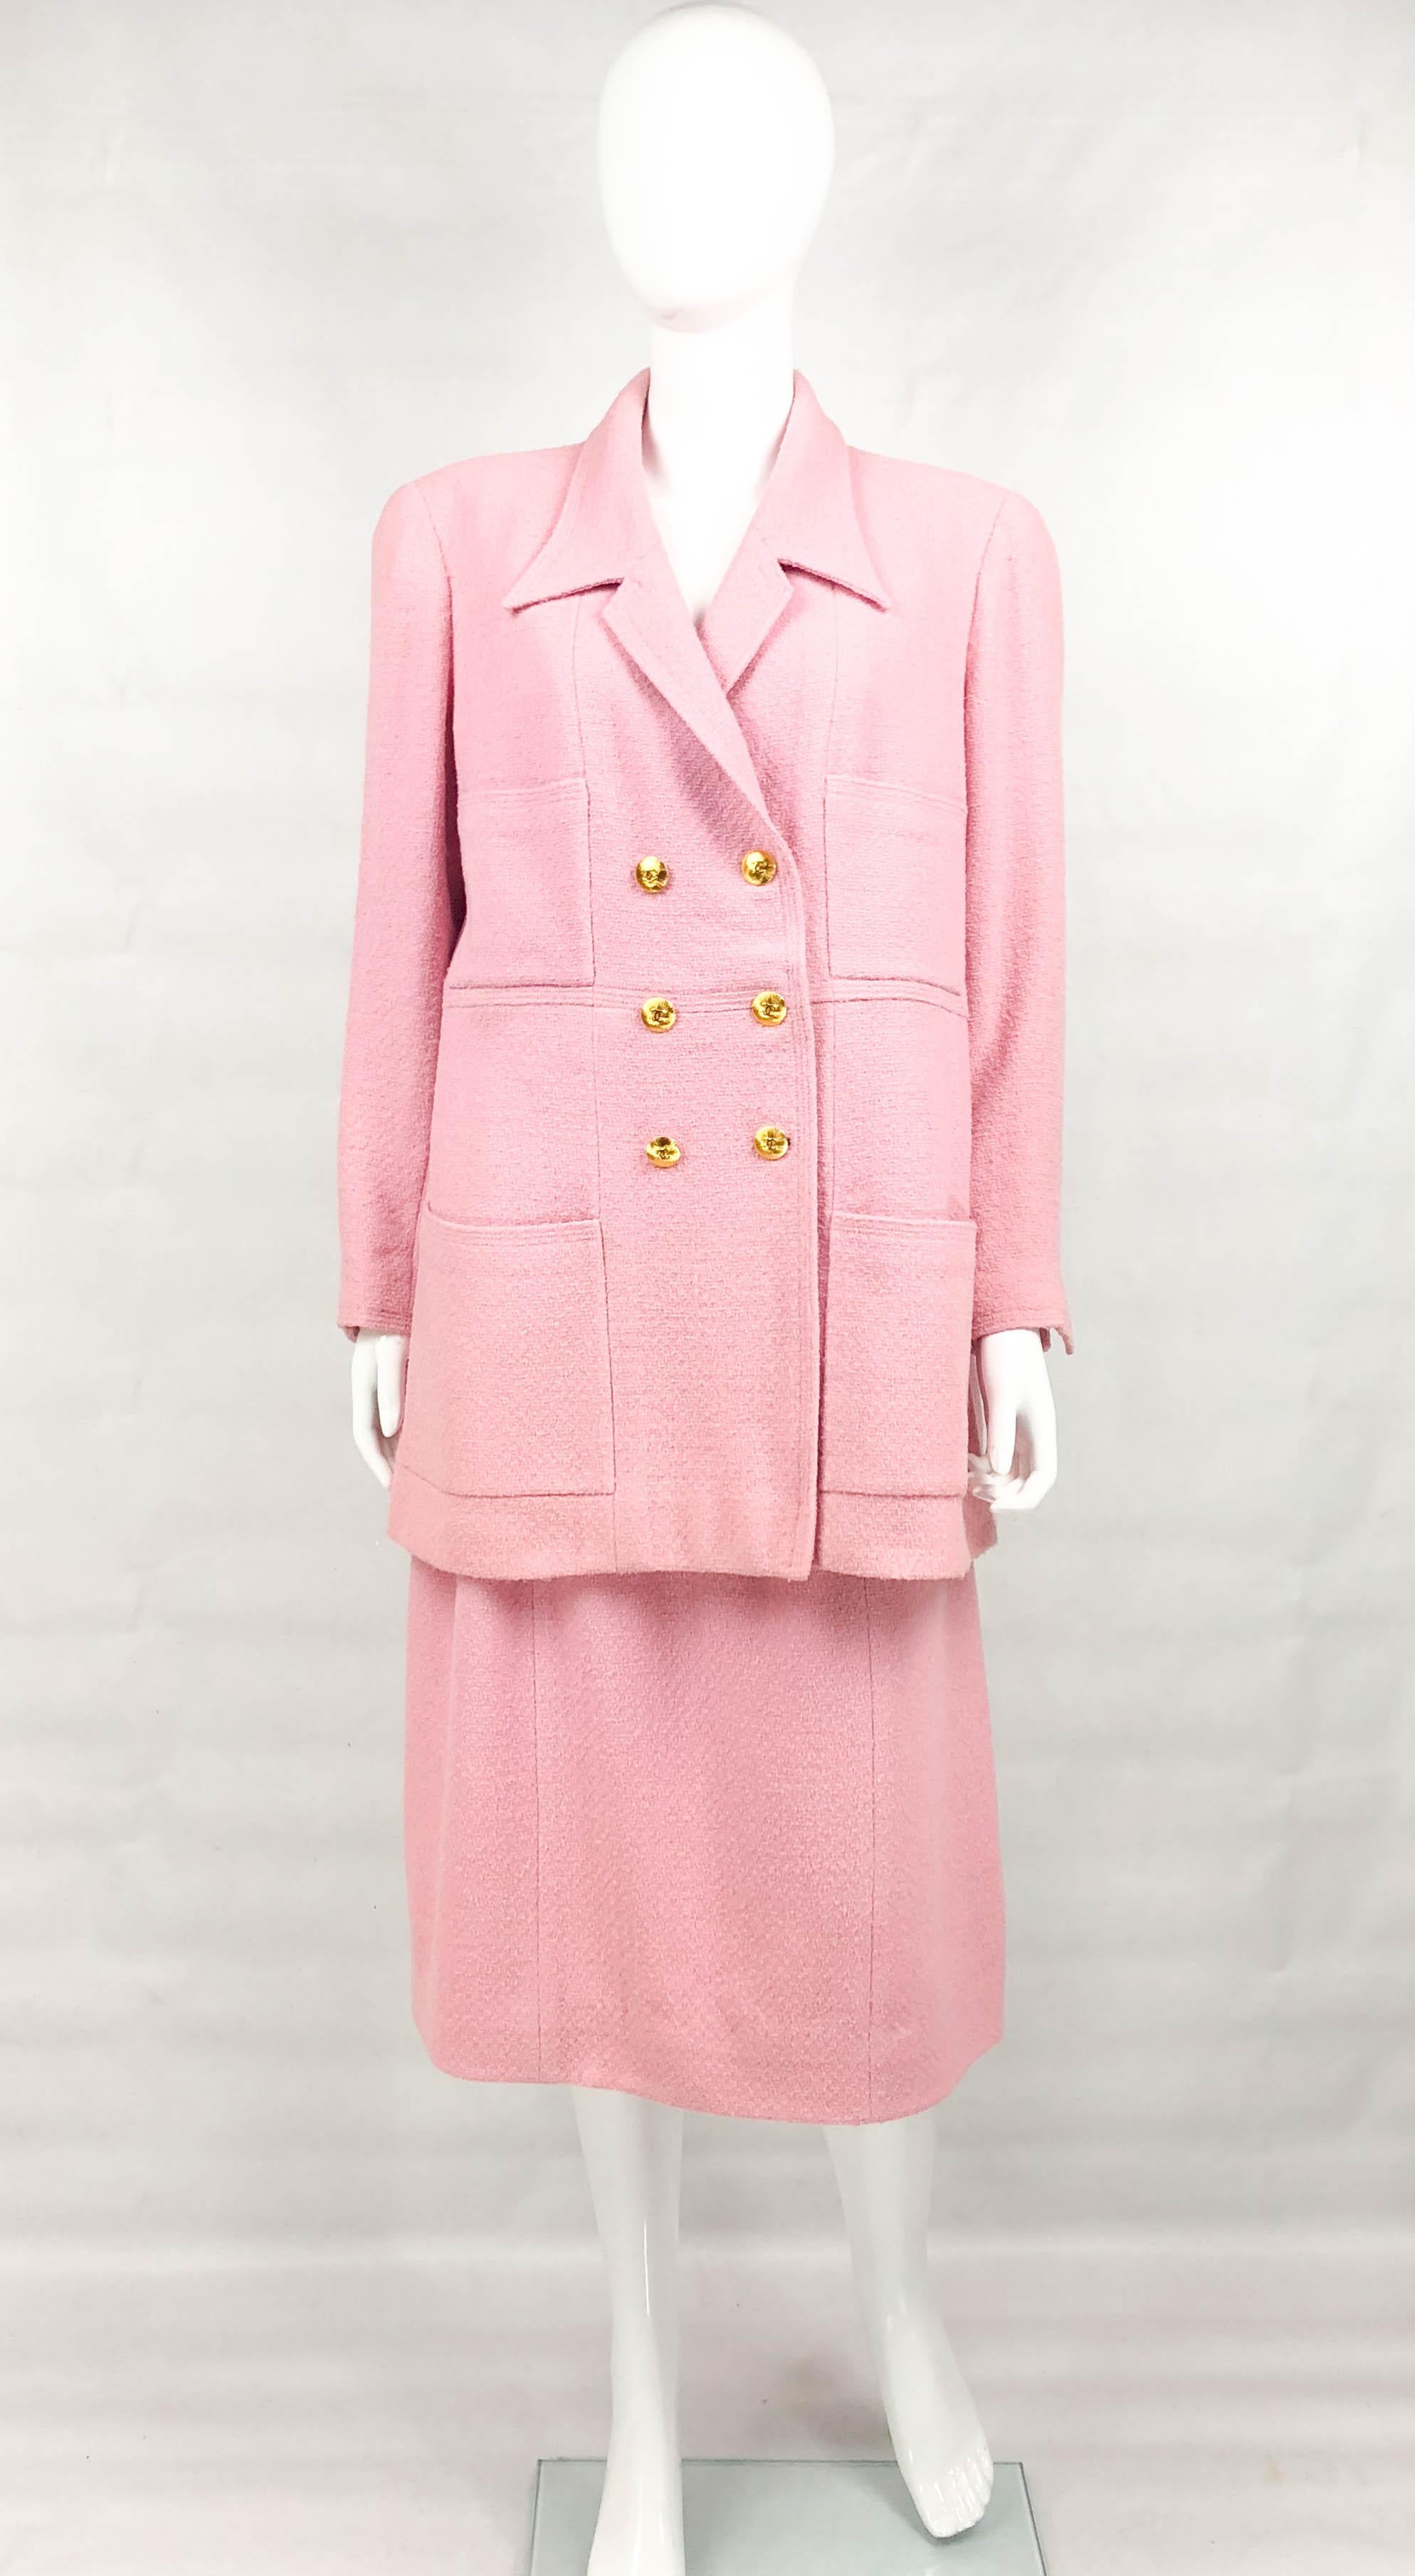 Vintage Chanel Pink Wool Suit with Logo Buttons. This stylish ensemble by Chanel was created for the 1996 Cruise Collection. Made in pink wool and lined in silk, it features 4 large pockets on the front. The round gilt ribbed buttons bear the iconic